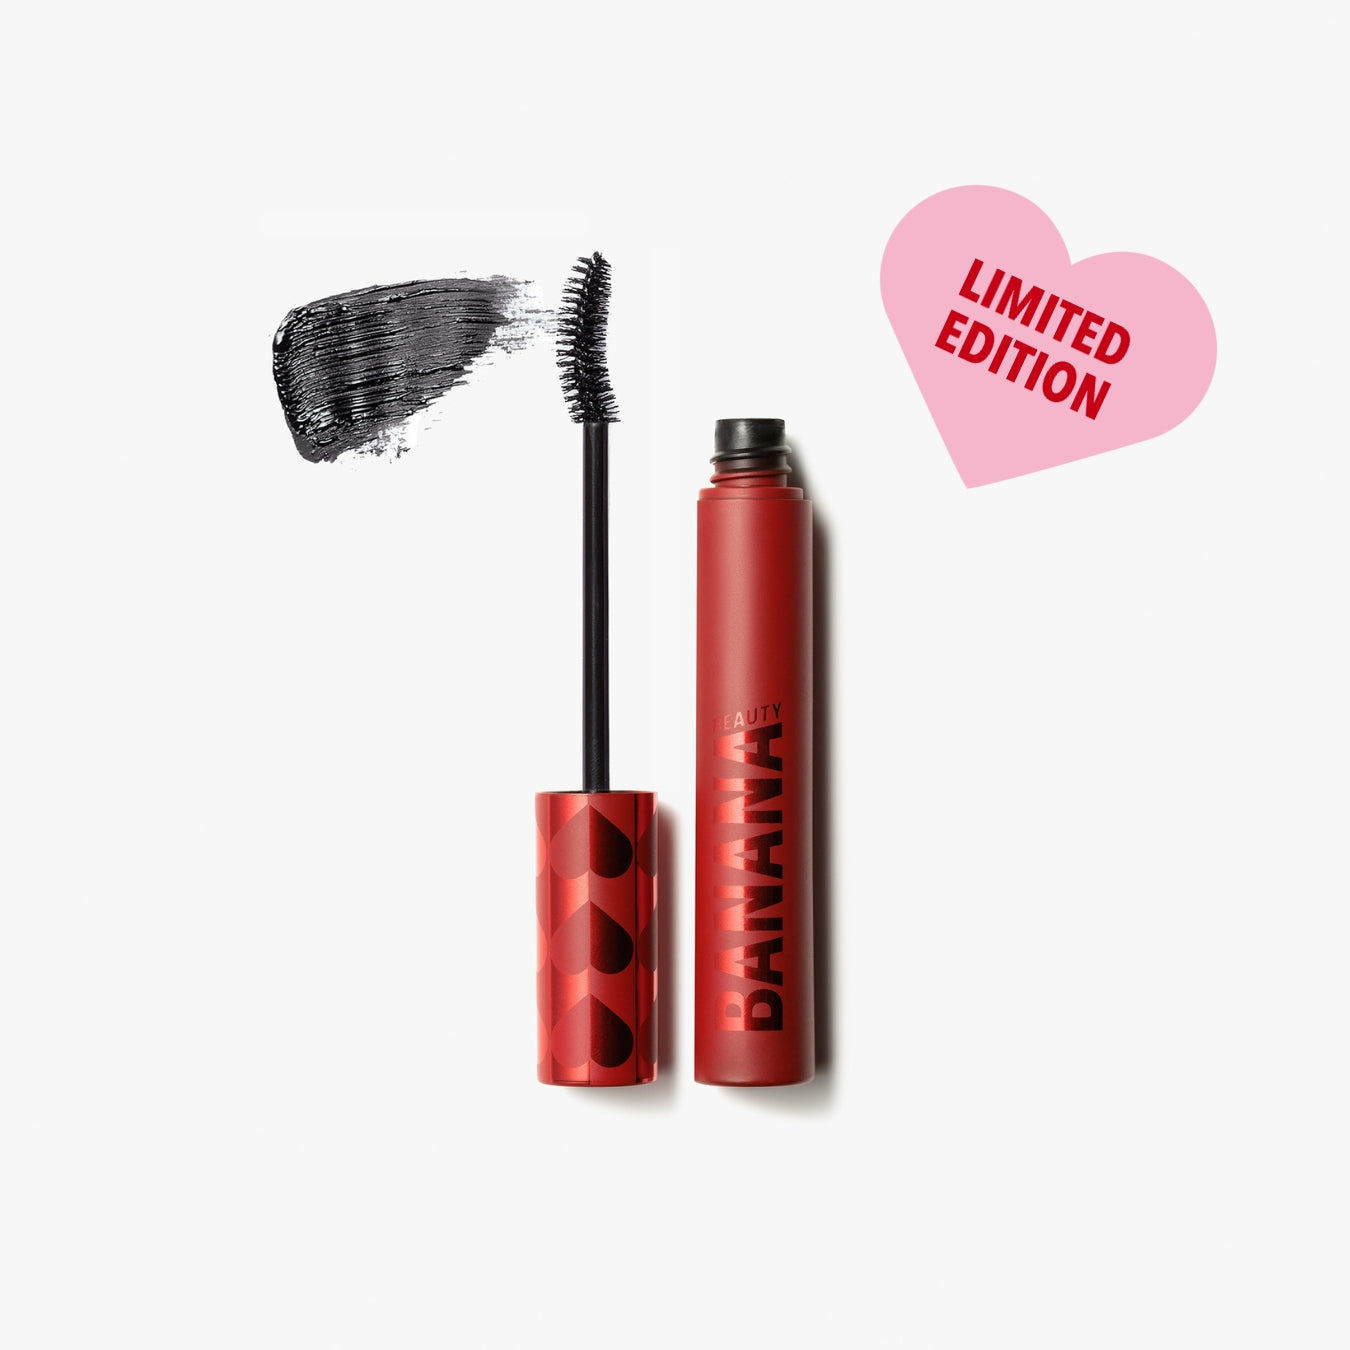 Be my crush Mascara - Kiss on the lips Edition